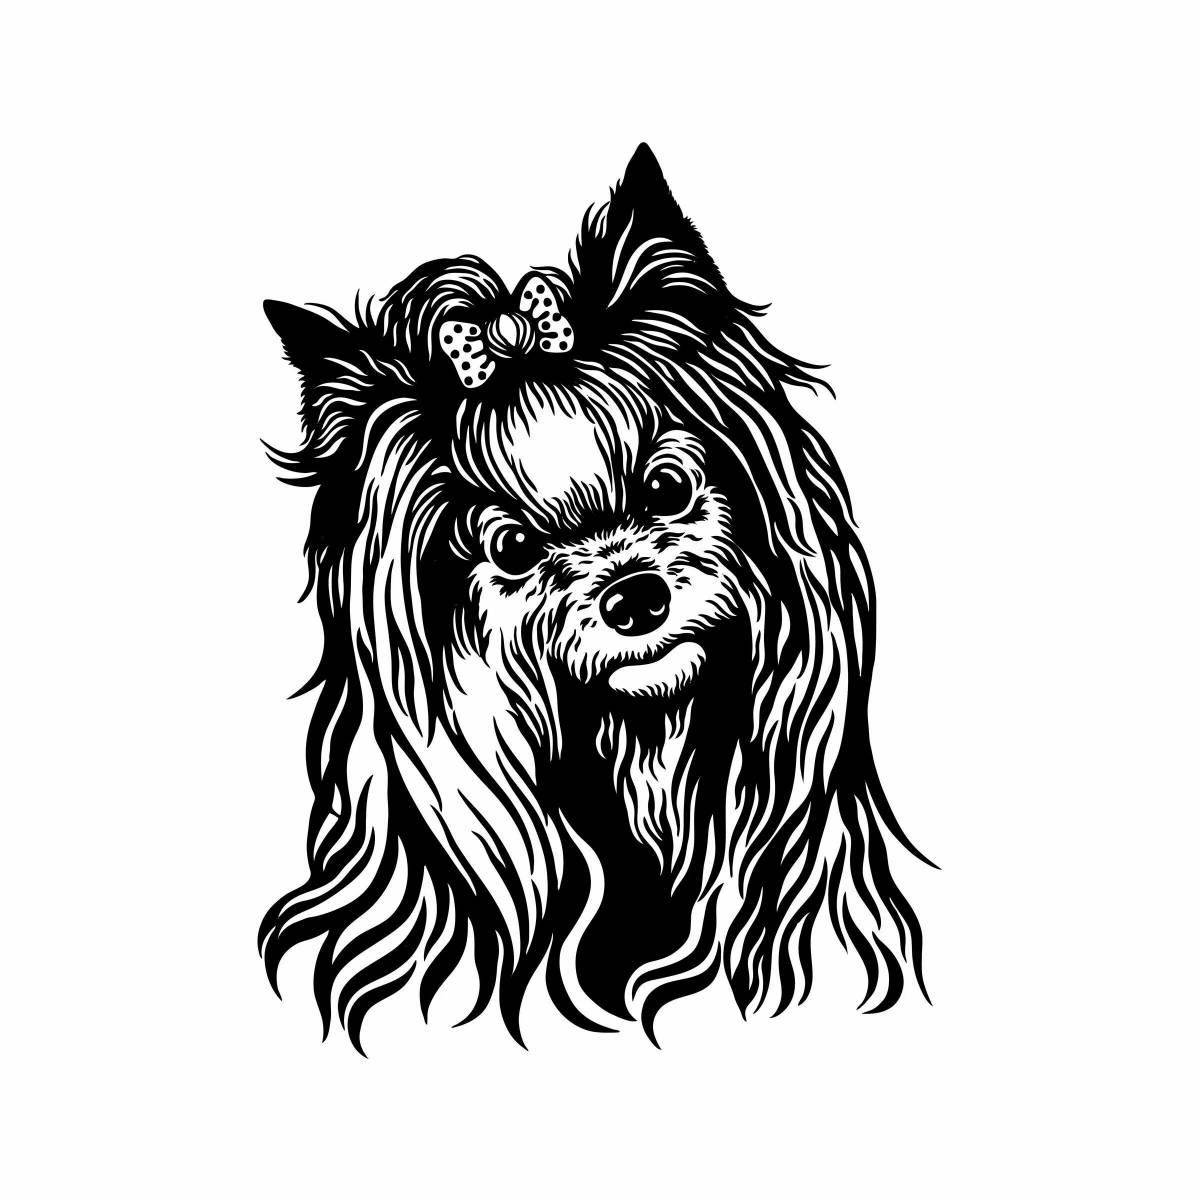 Colouring merry yorkie